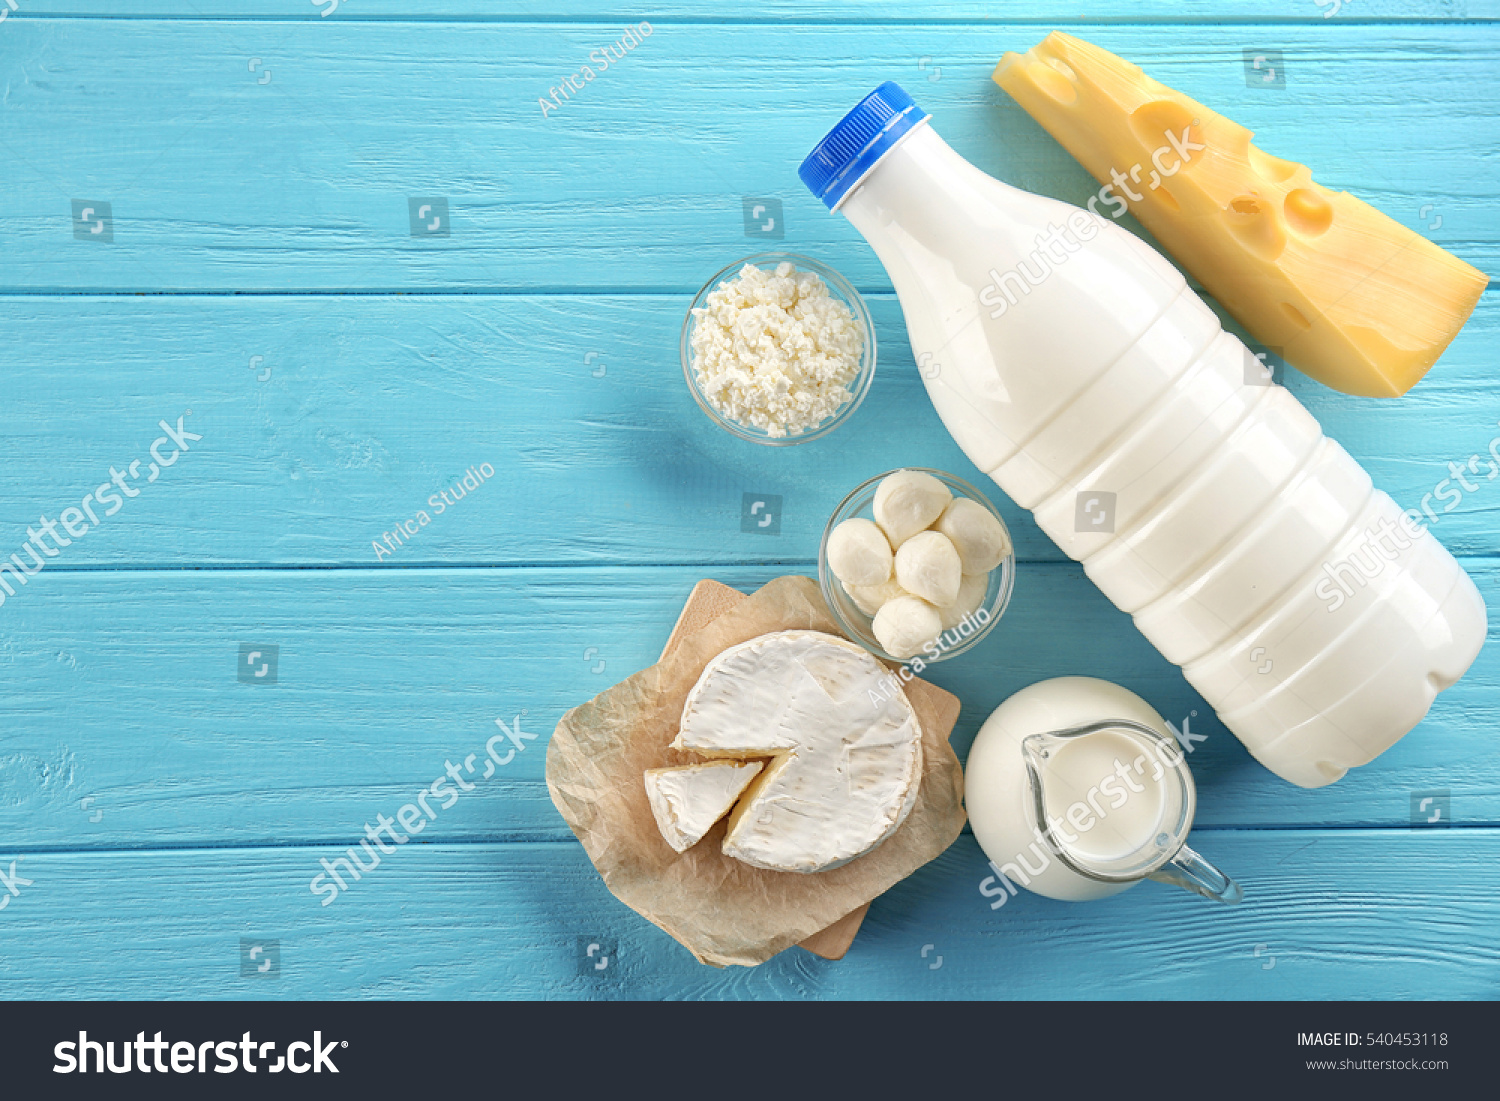 Dairy products on wooden background, top view #540453118